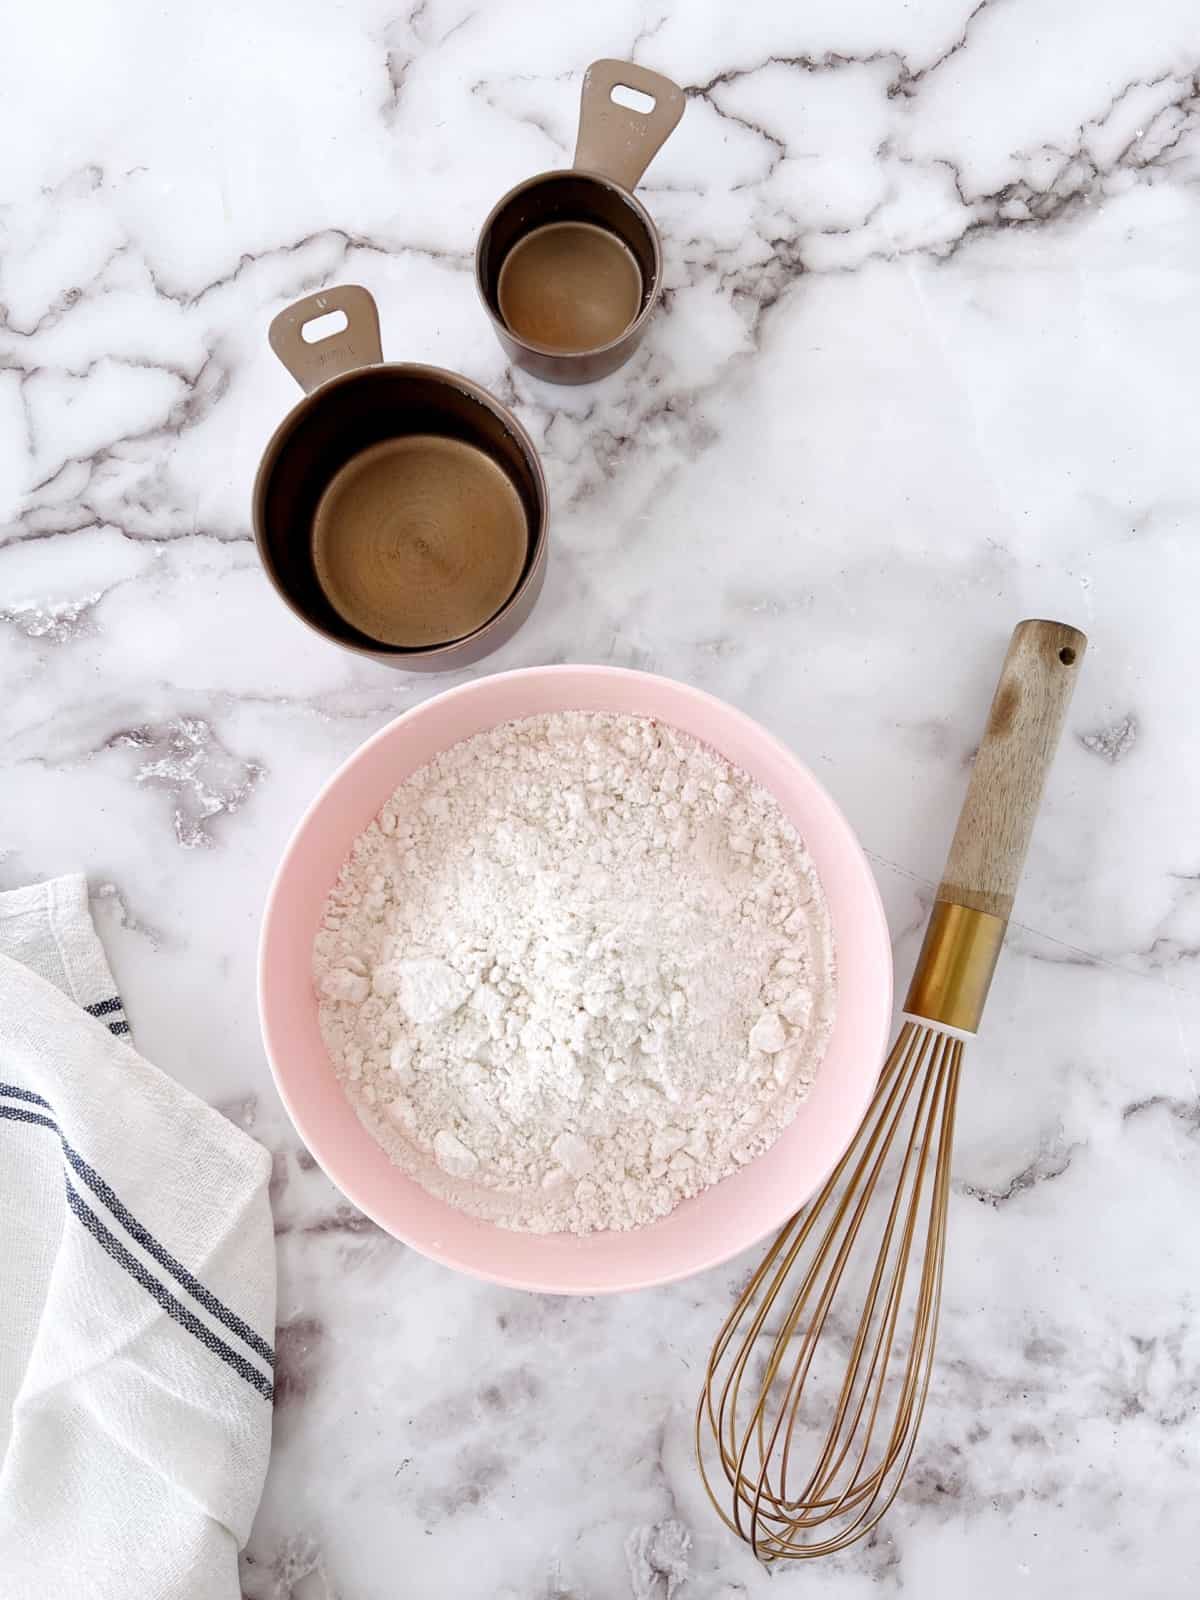 pancake mix and empty measuring cups with whisks